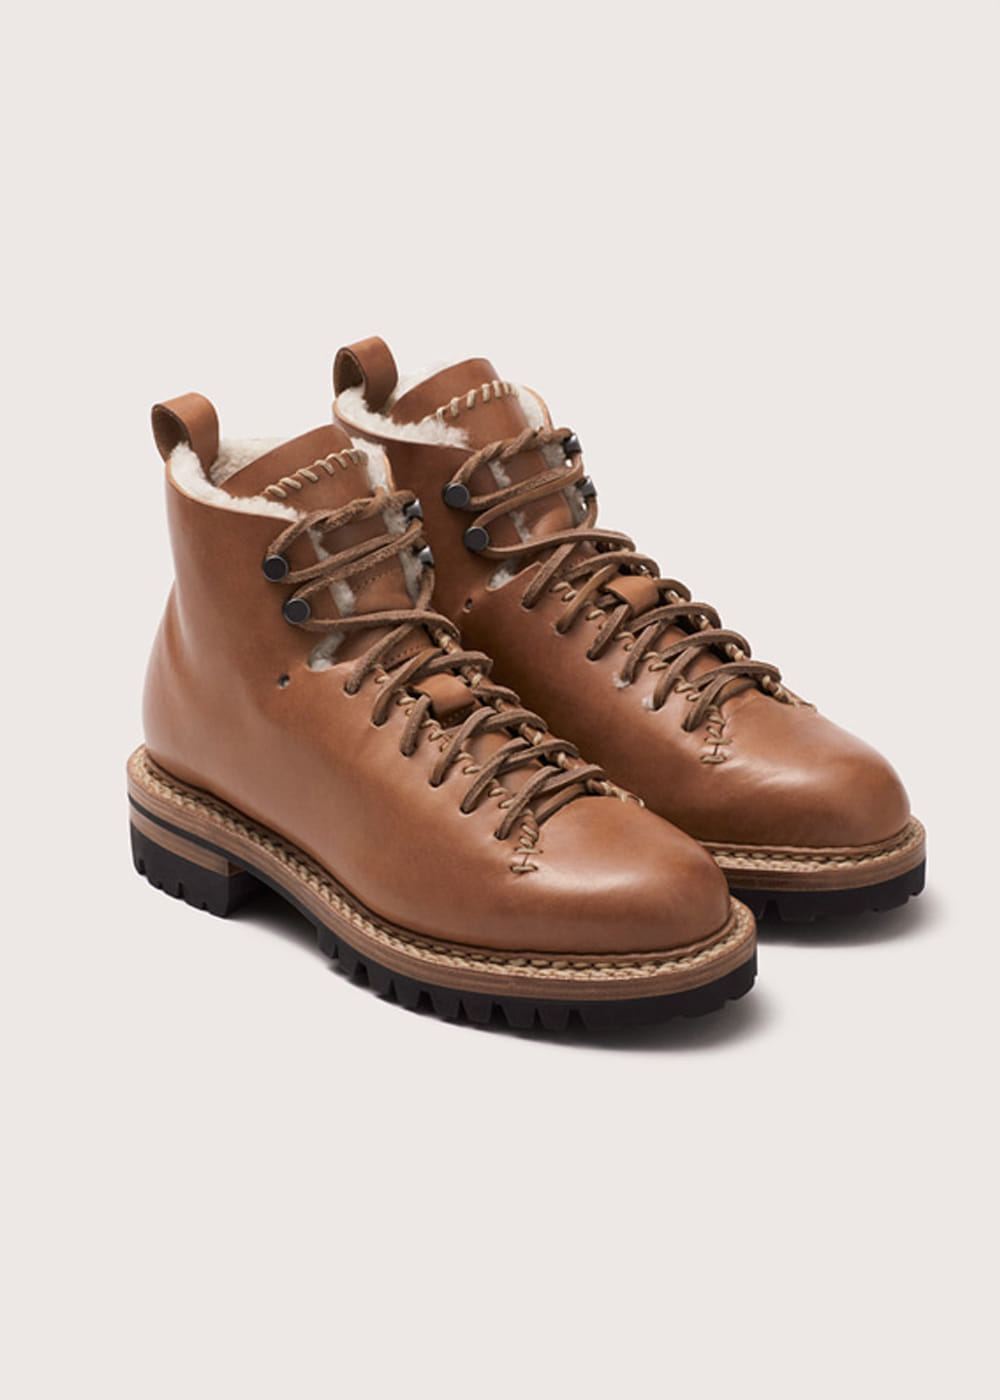 Whips Stitch Hiker with Wool - Tan